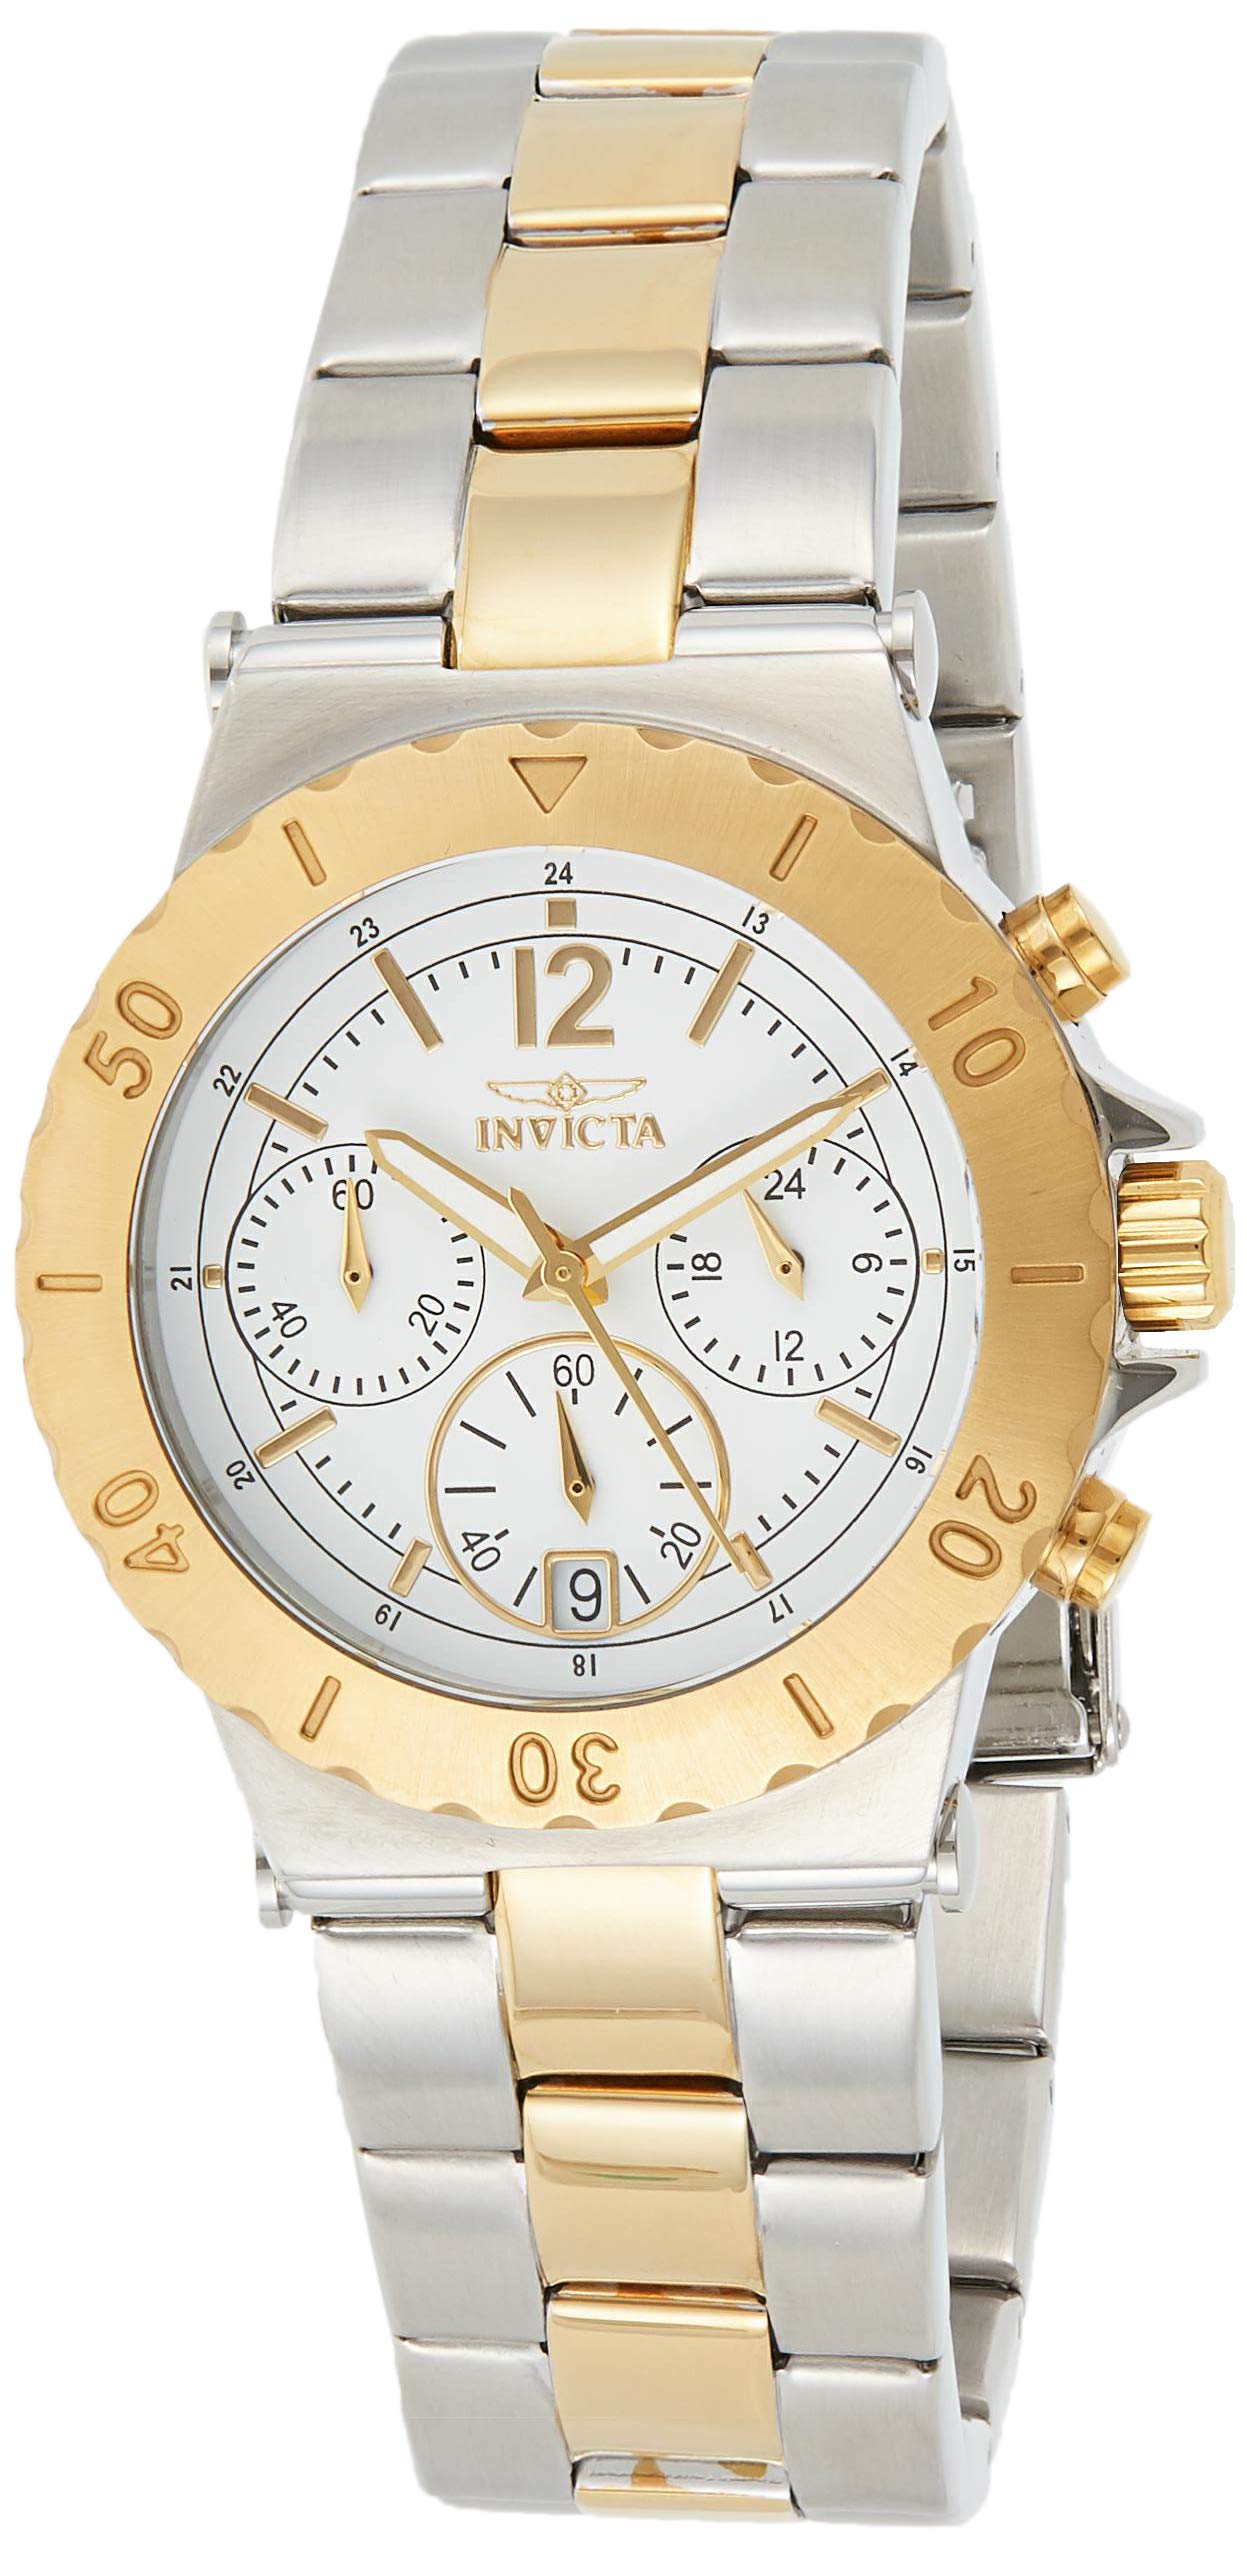 Invicta Women's 14855 Specialty Chronograph White Dial Two-Tone Watch